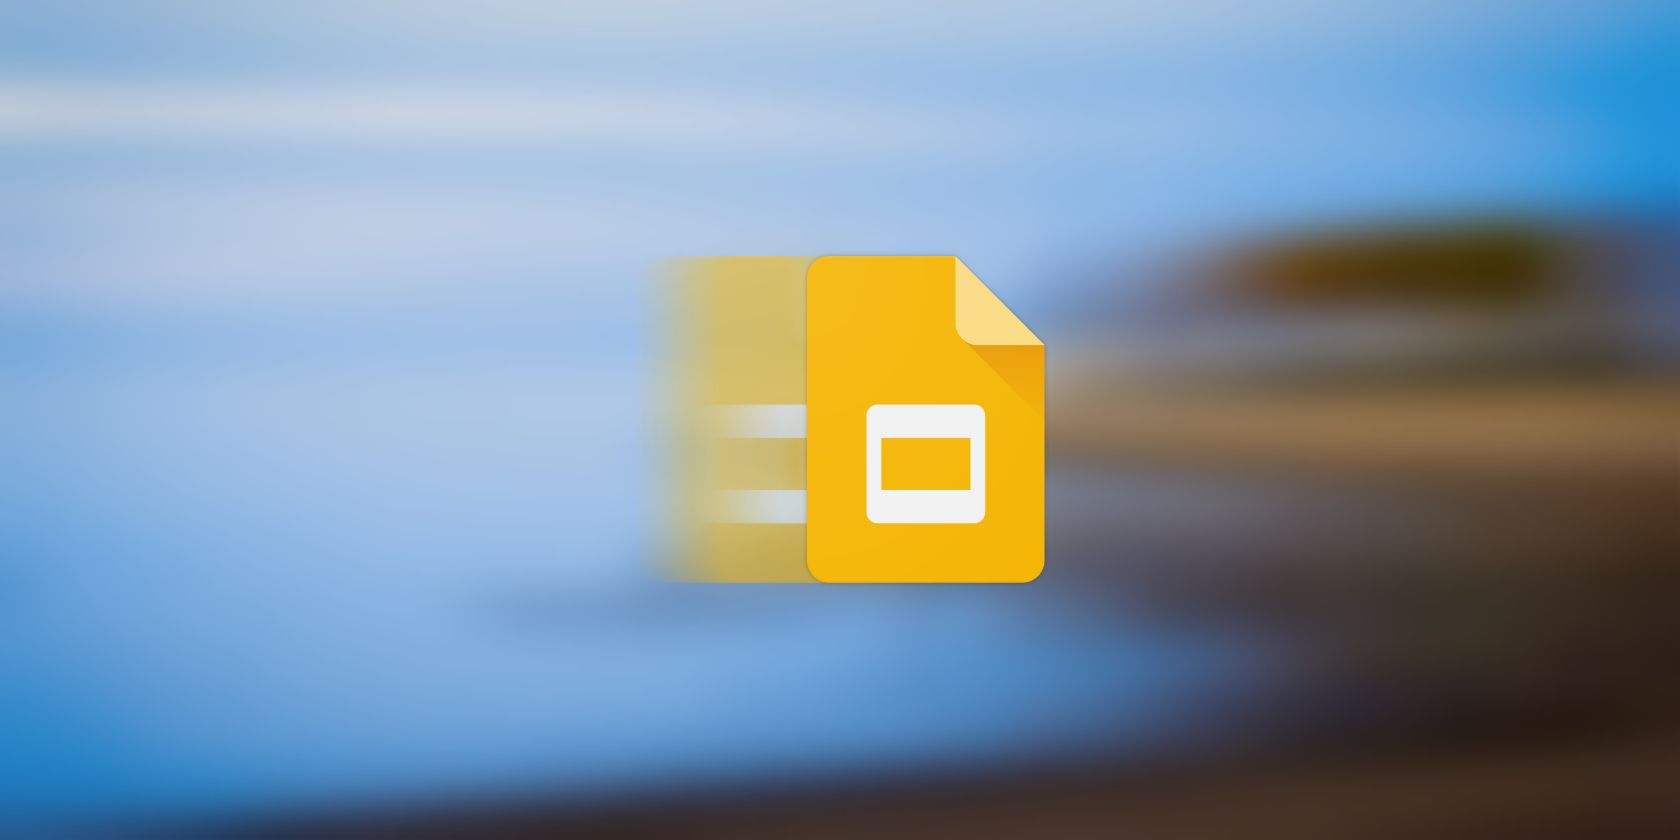 How to Add Animation in Google Slides